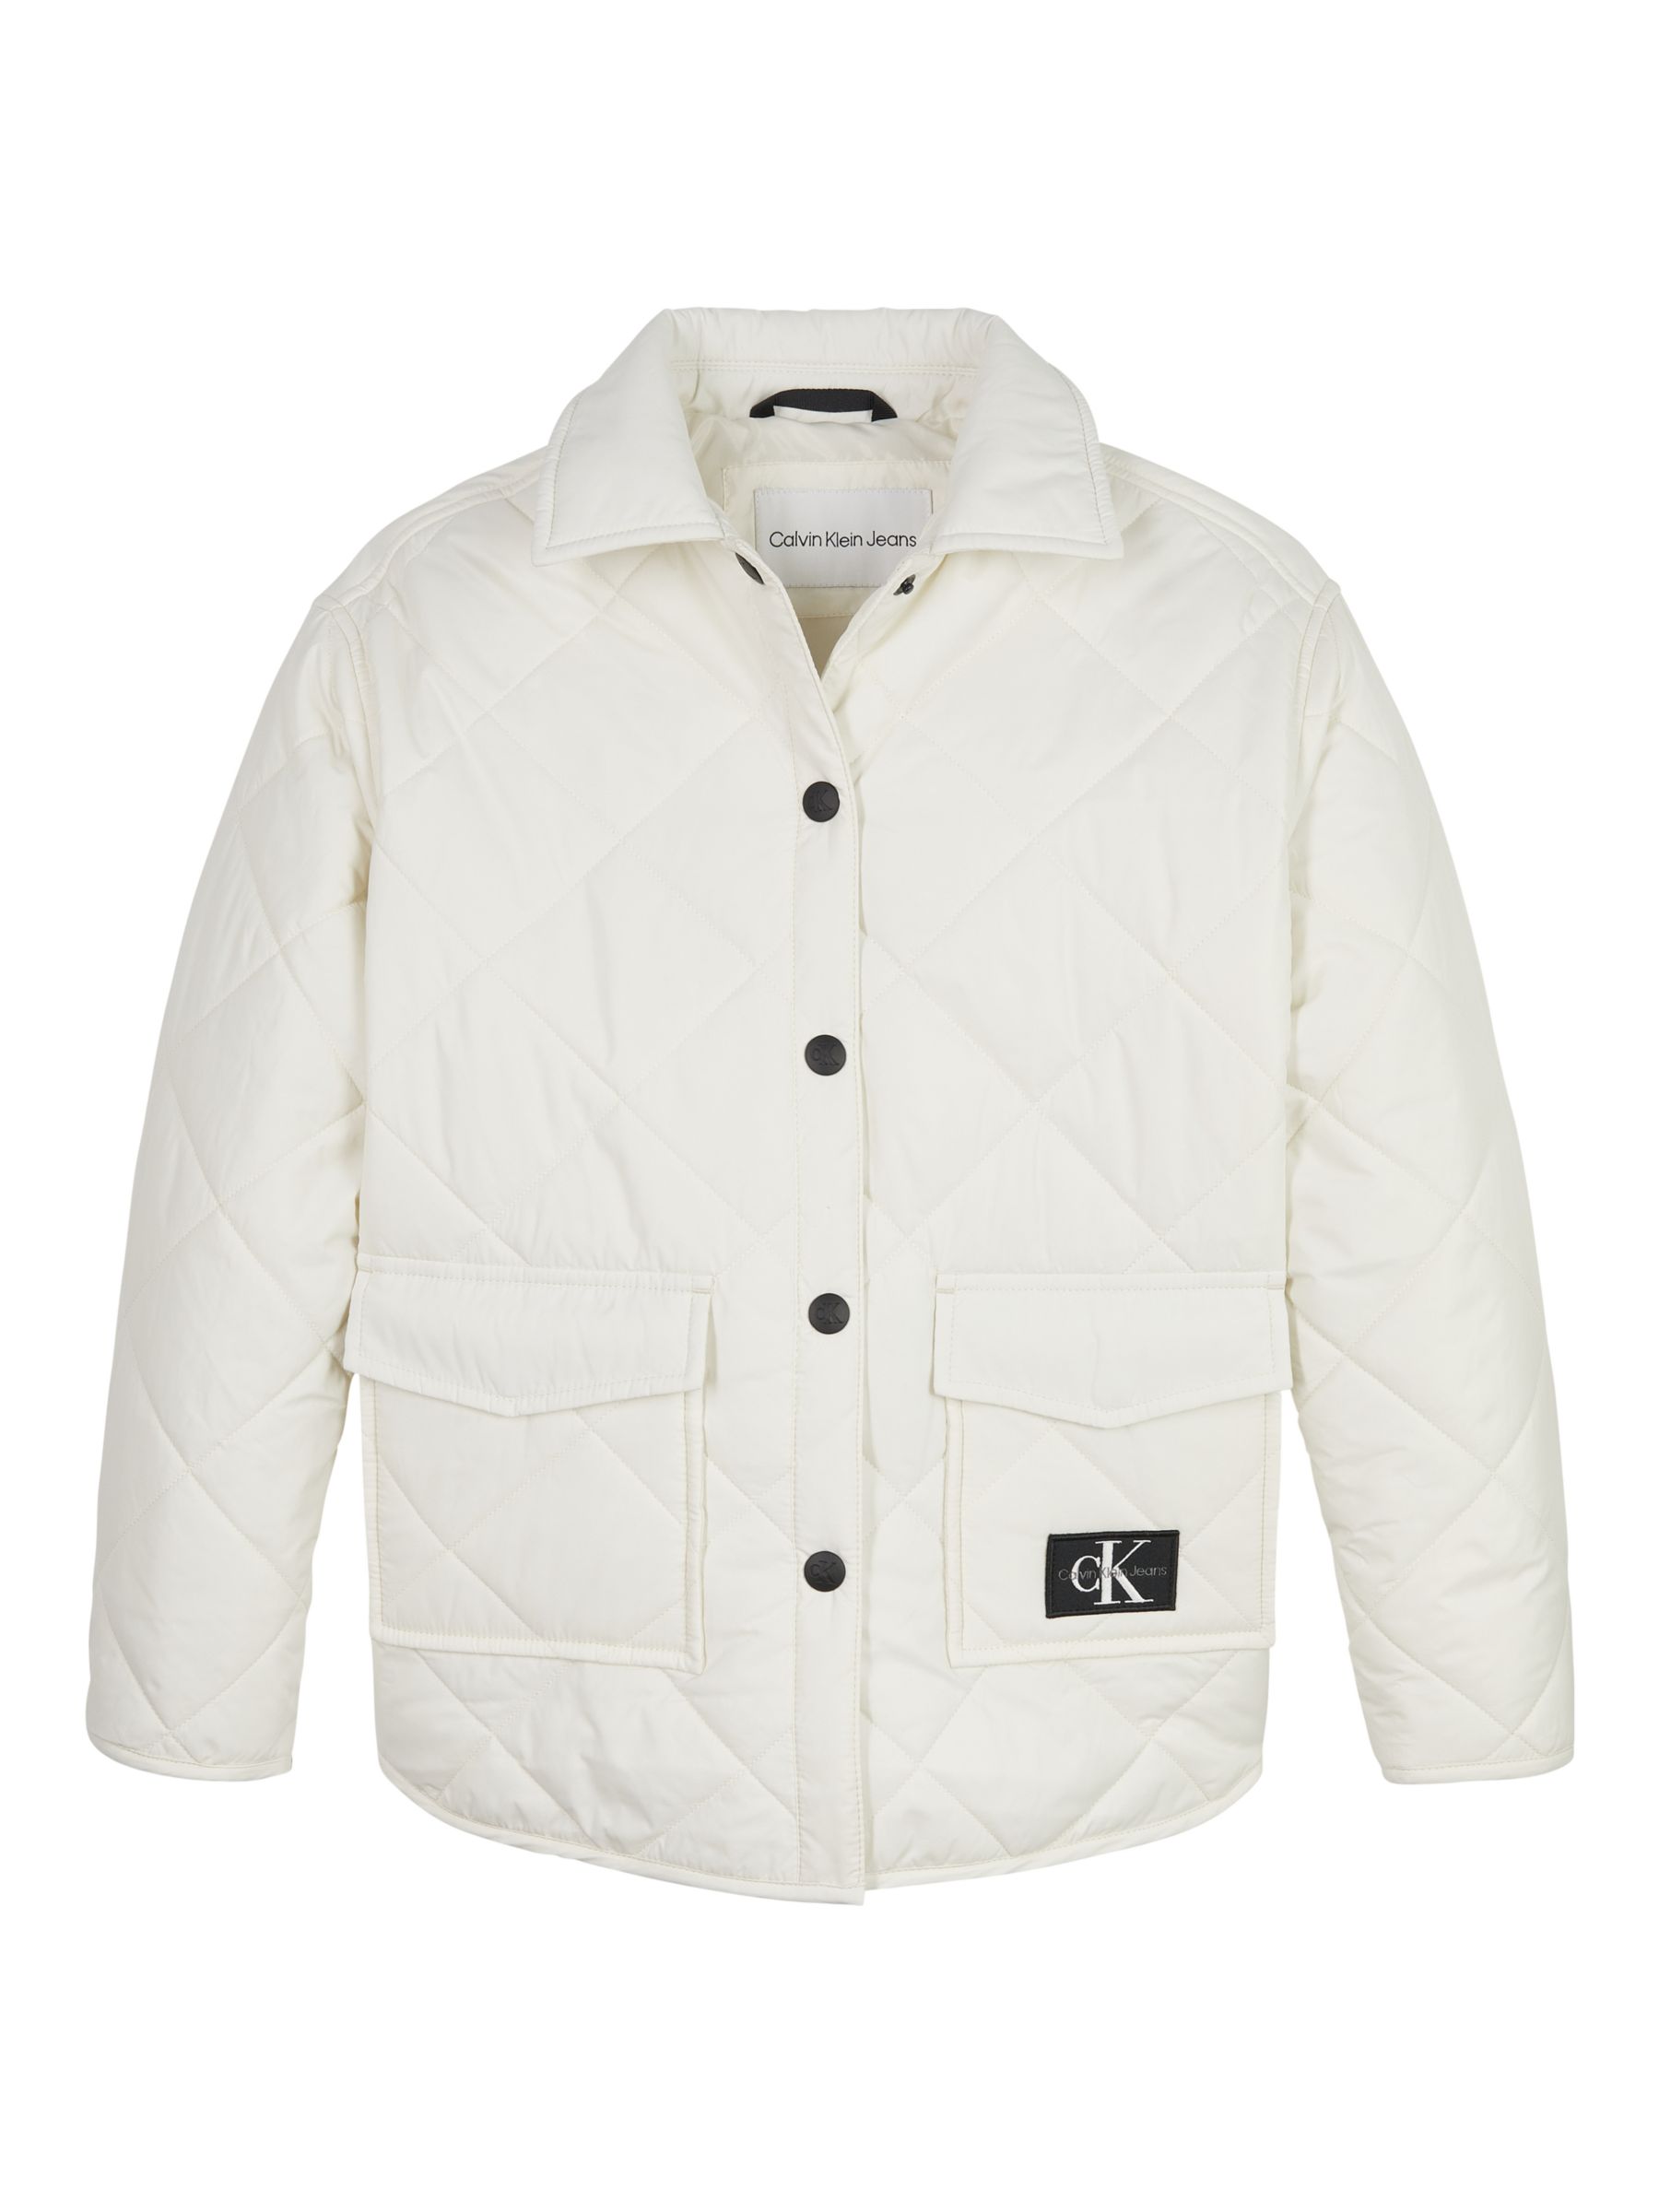 Calvin Klein Jeans Kids' Wide Quilted Overshirt, Ivory